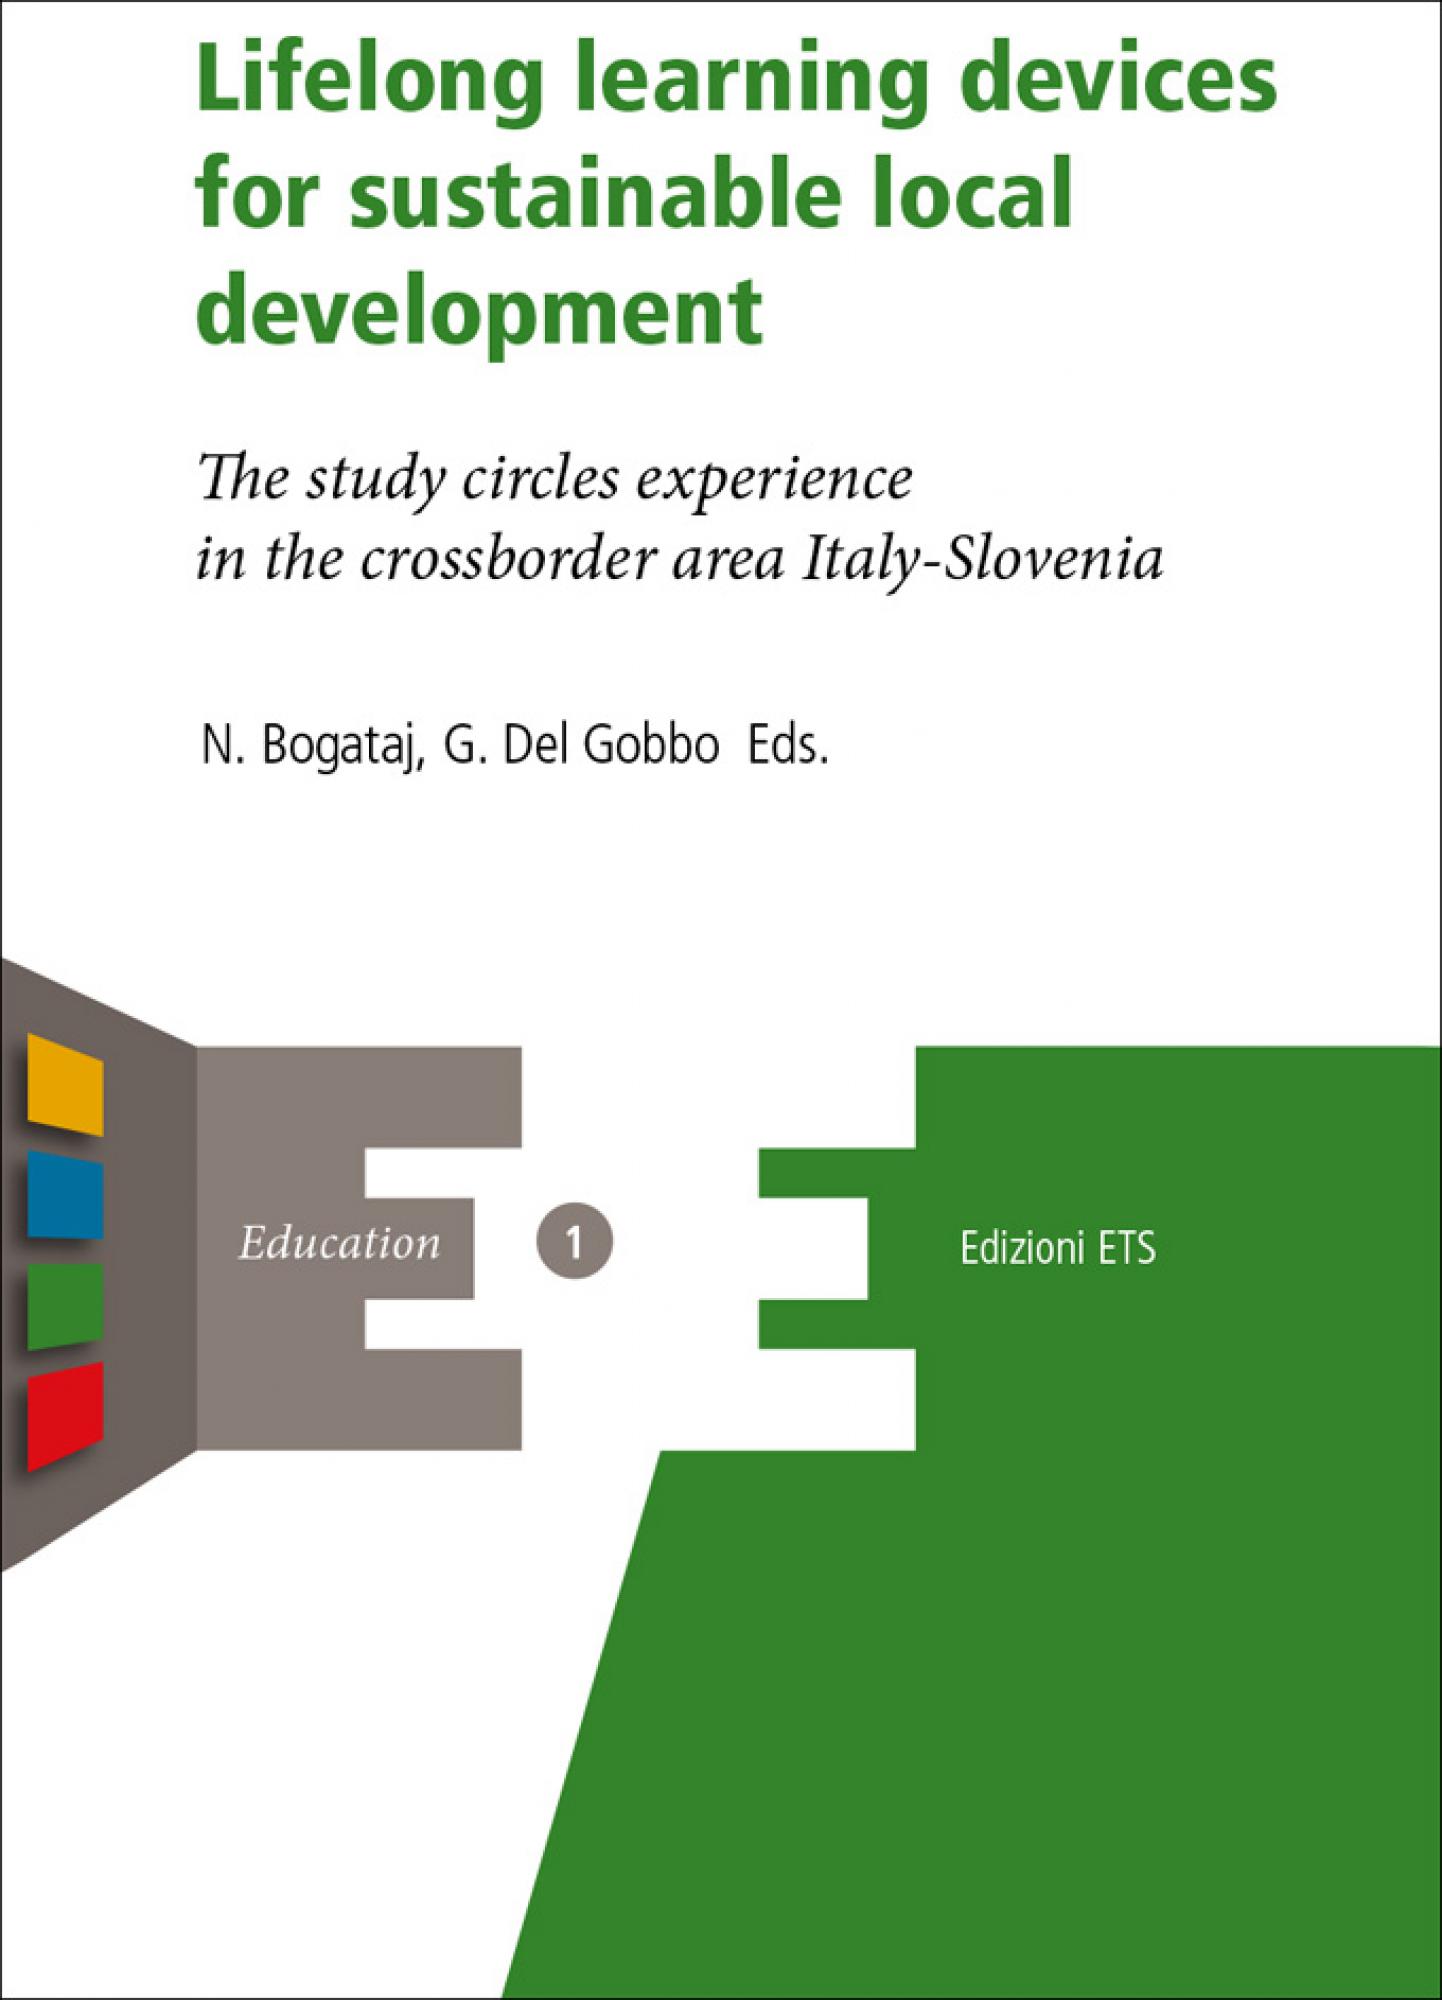 Lifelong learning devices for sustainable local development.The study circles experience in the crossborder area Italy-Slovenia